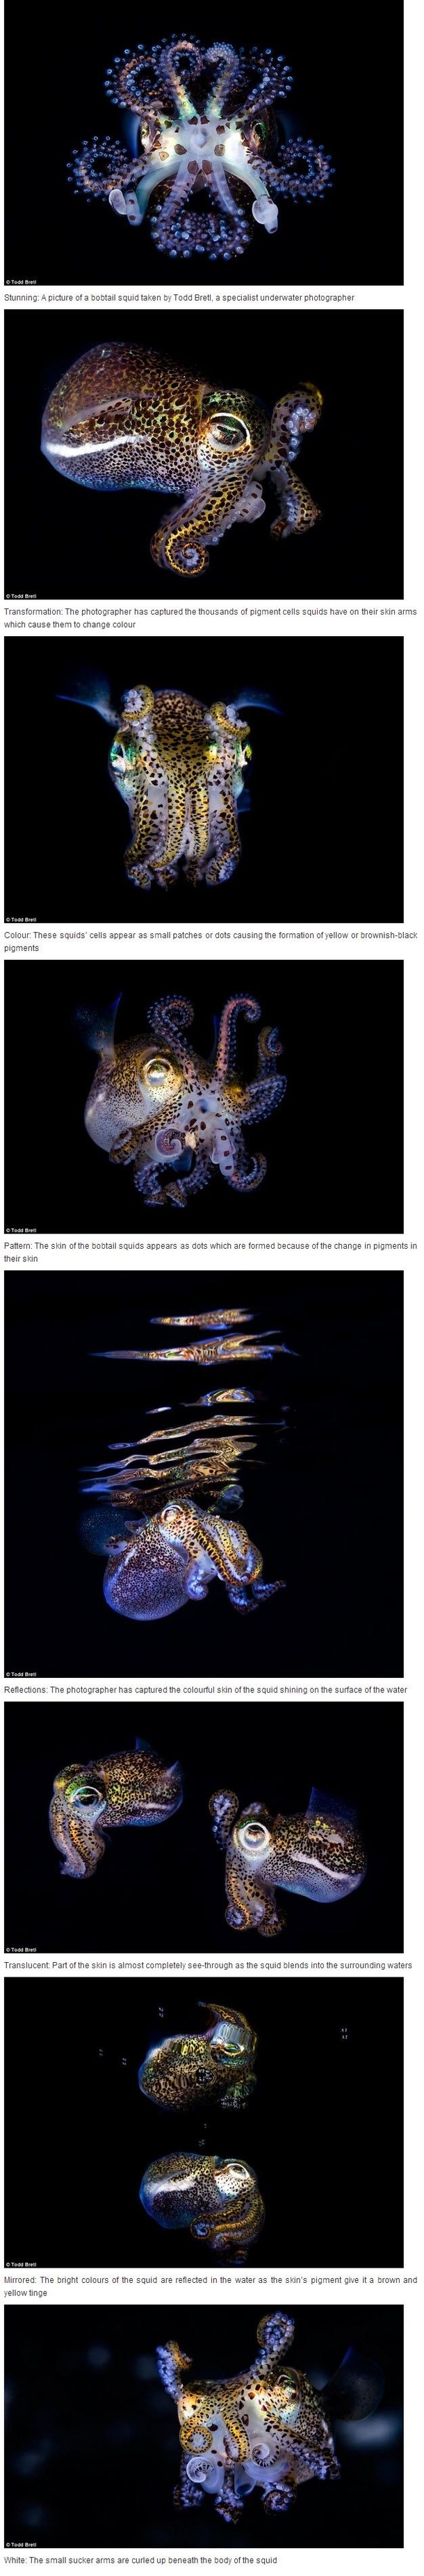 These stunning images capture the amazing skin of the bobtail squid who use thousands of cells to change colour 